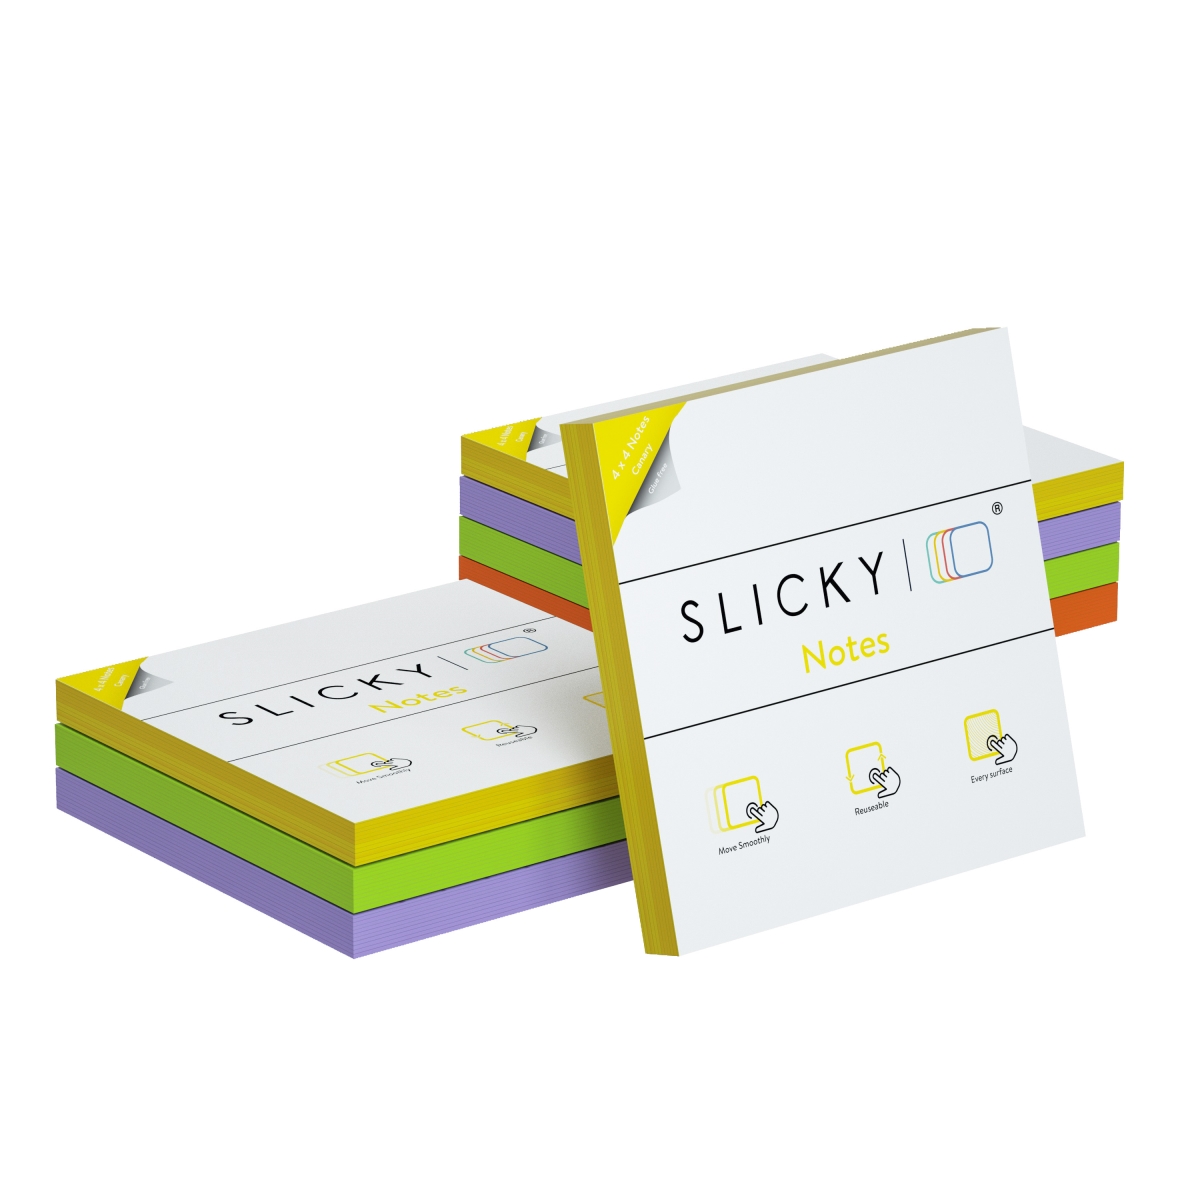 C4495p8c4b0369 4 X 4 In. - Sticky Cards - Assorted Color - Pack Of 8